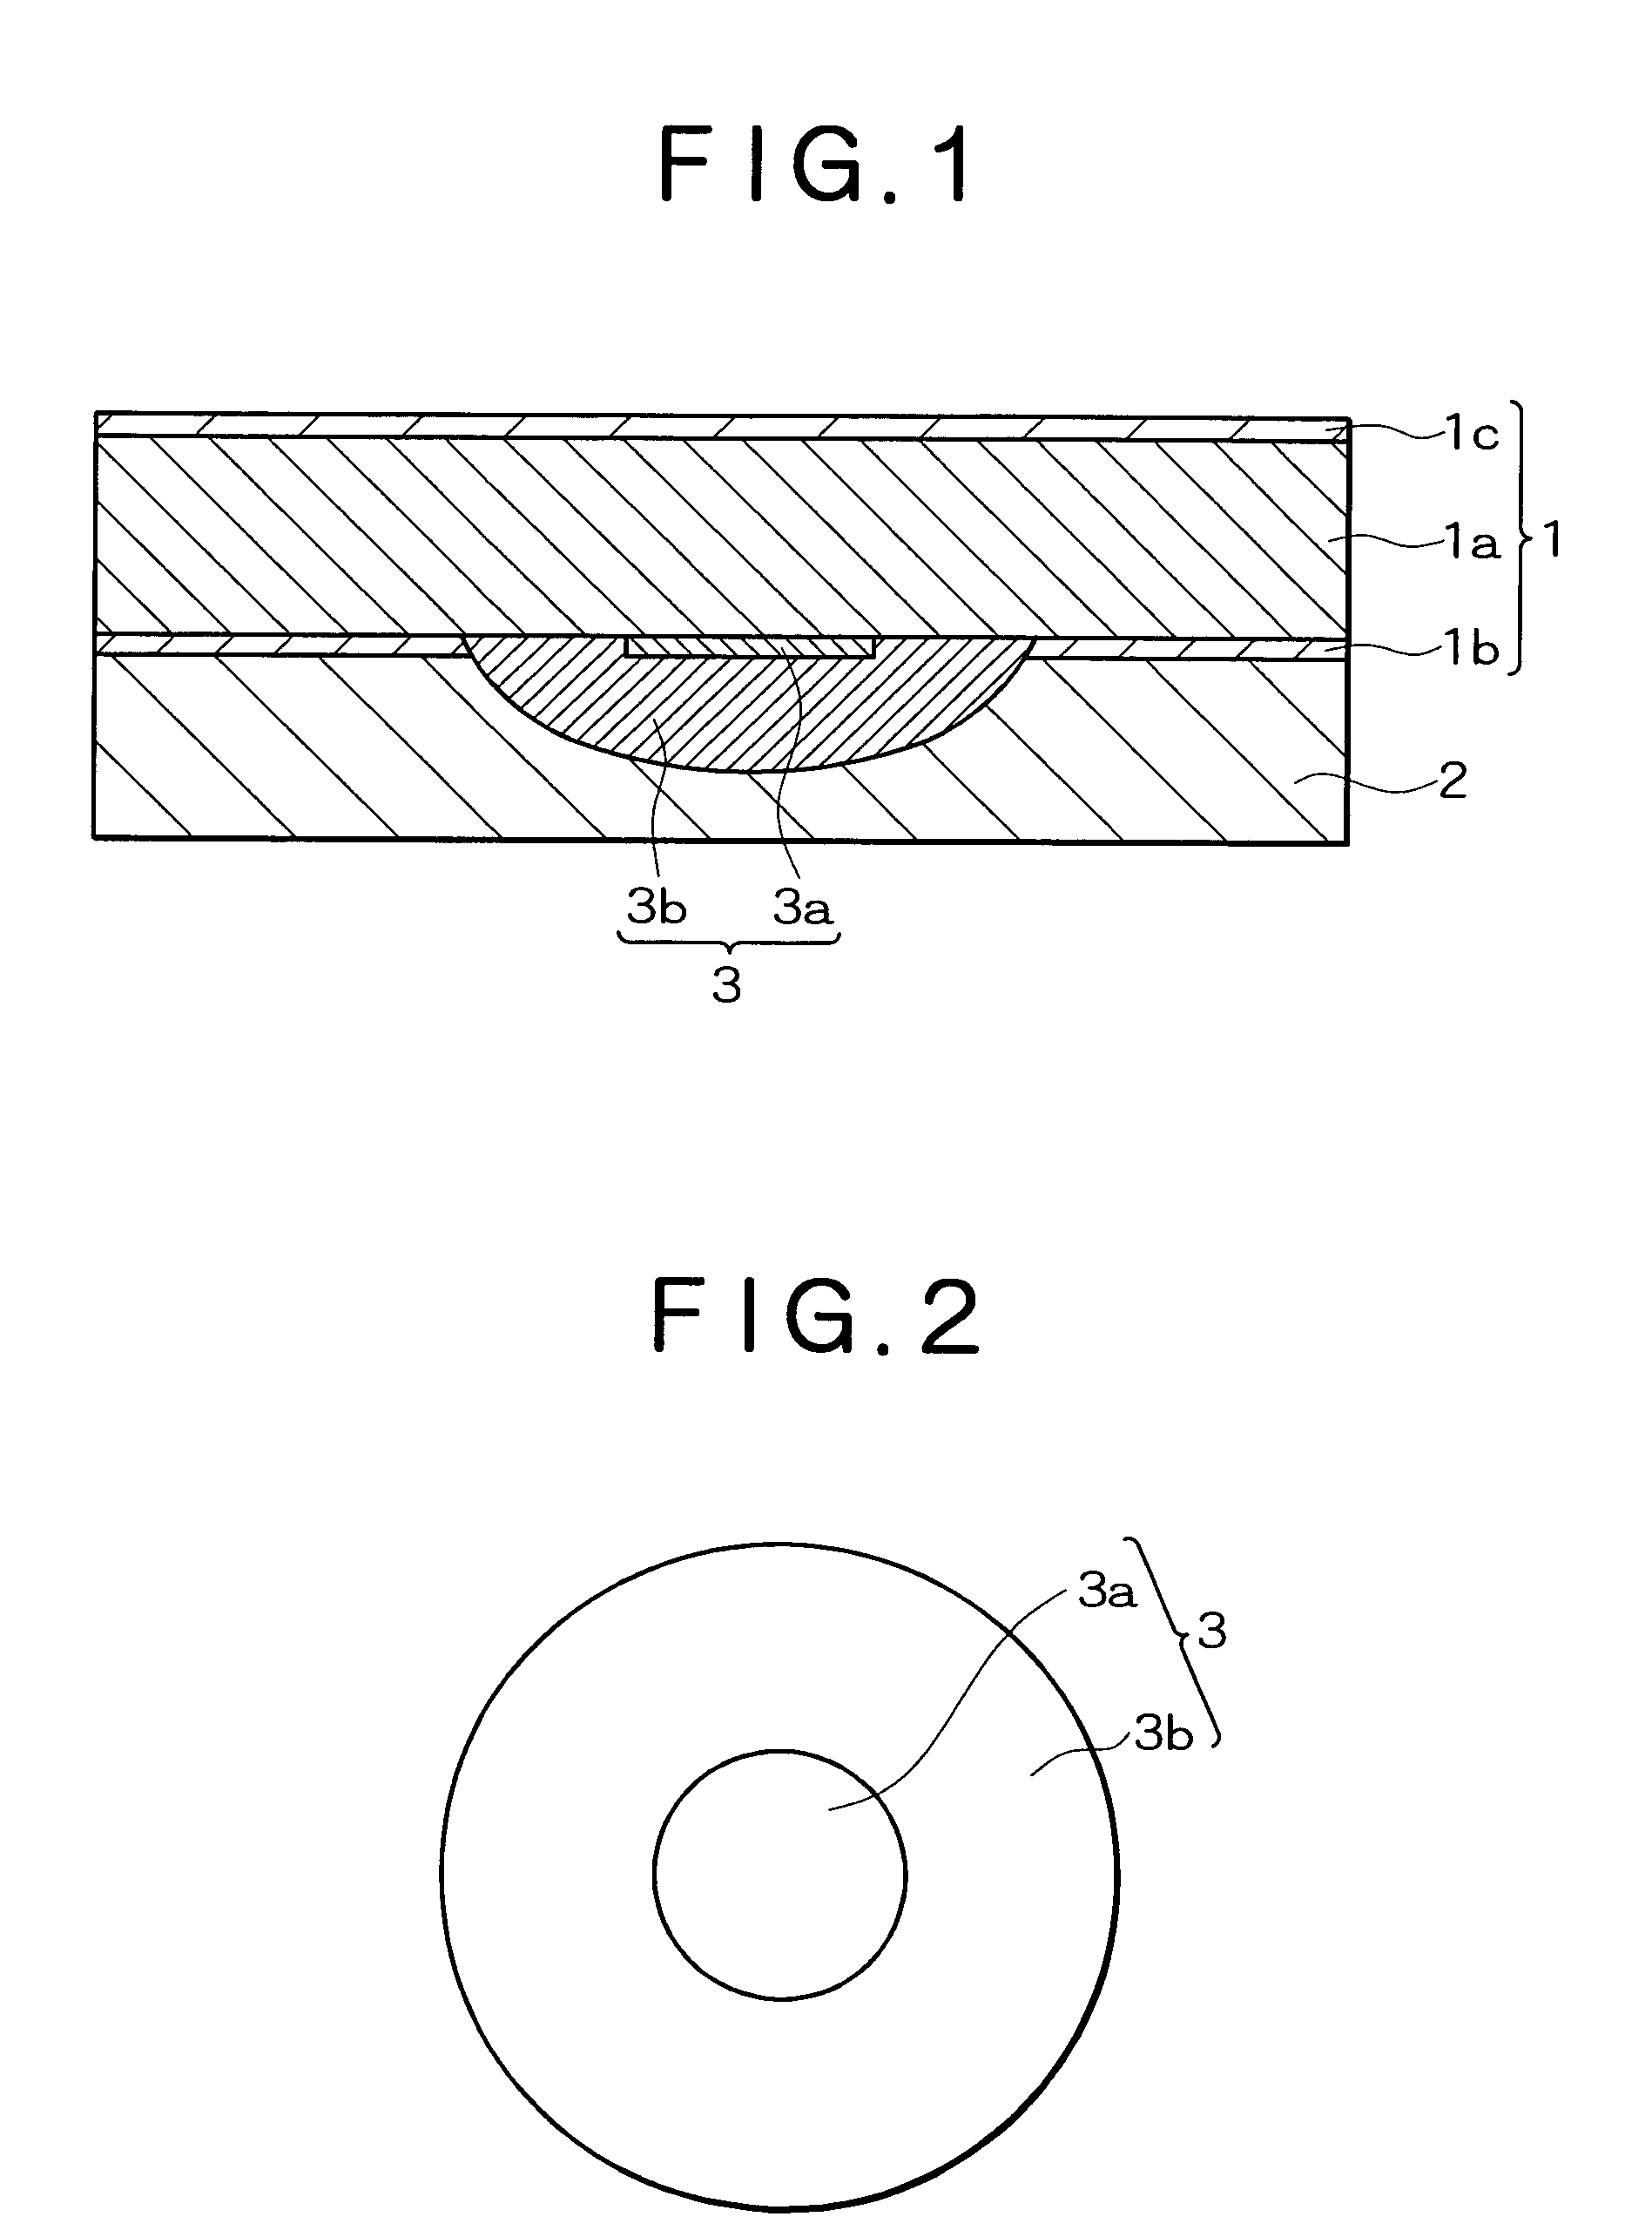 Weldment of different materials and resistance spot welding method